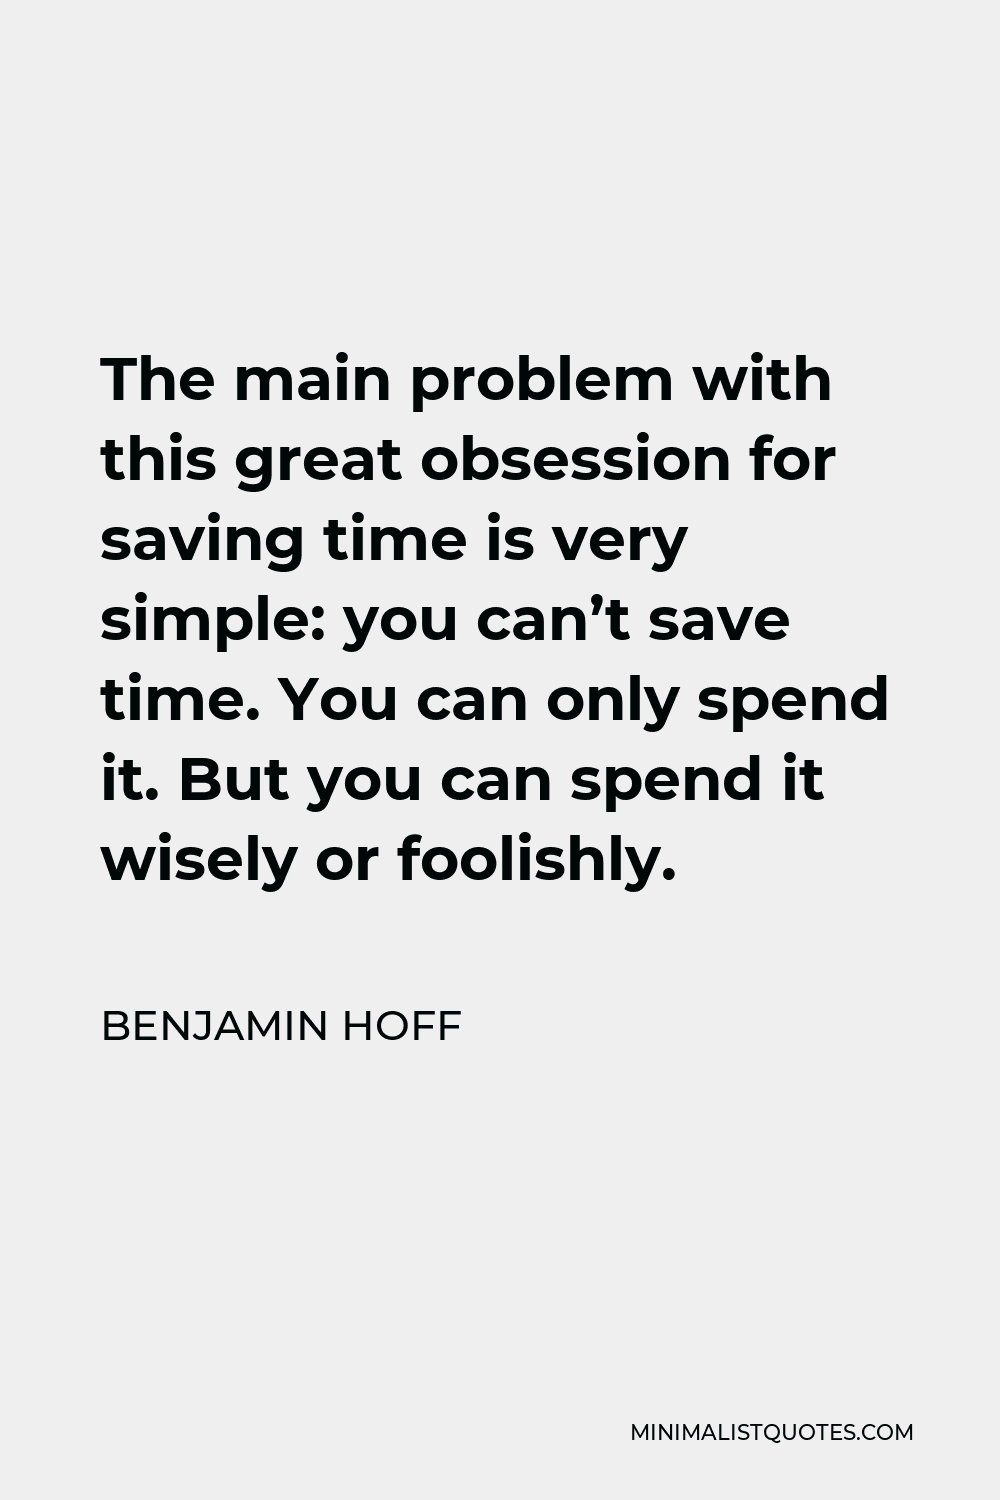 Benjamin Hoff Quote - The main problem with this great obsession for saving time is very simple: you can’t save time. You can only spend it. But you can spend it wisely or foolishly.